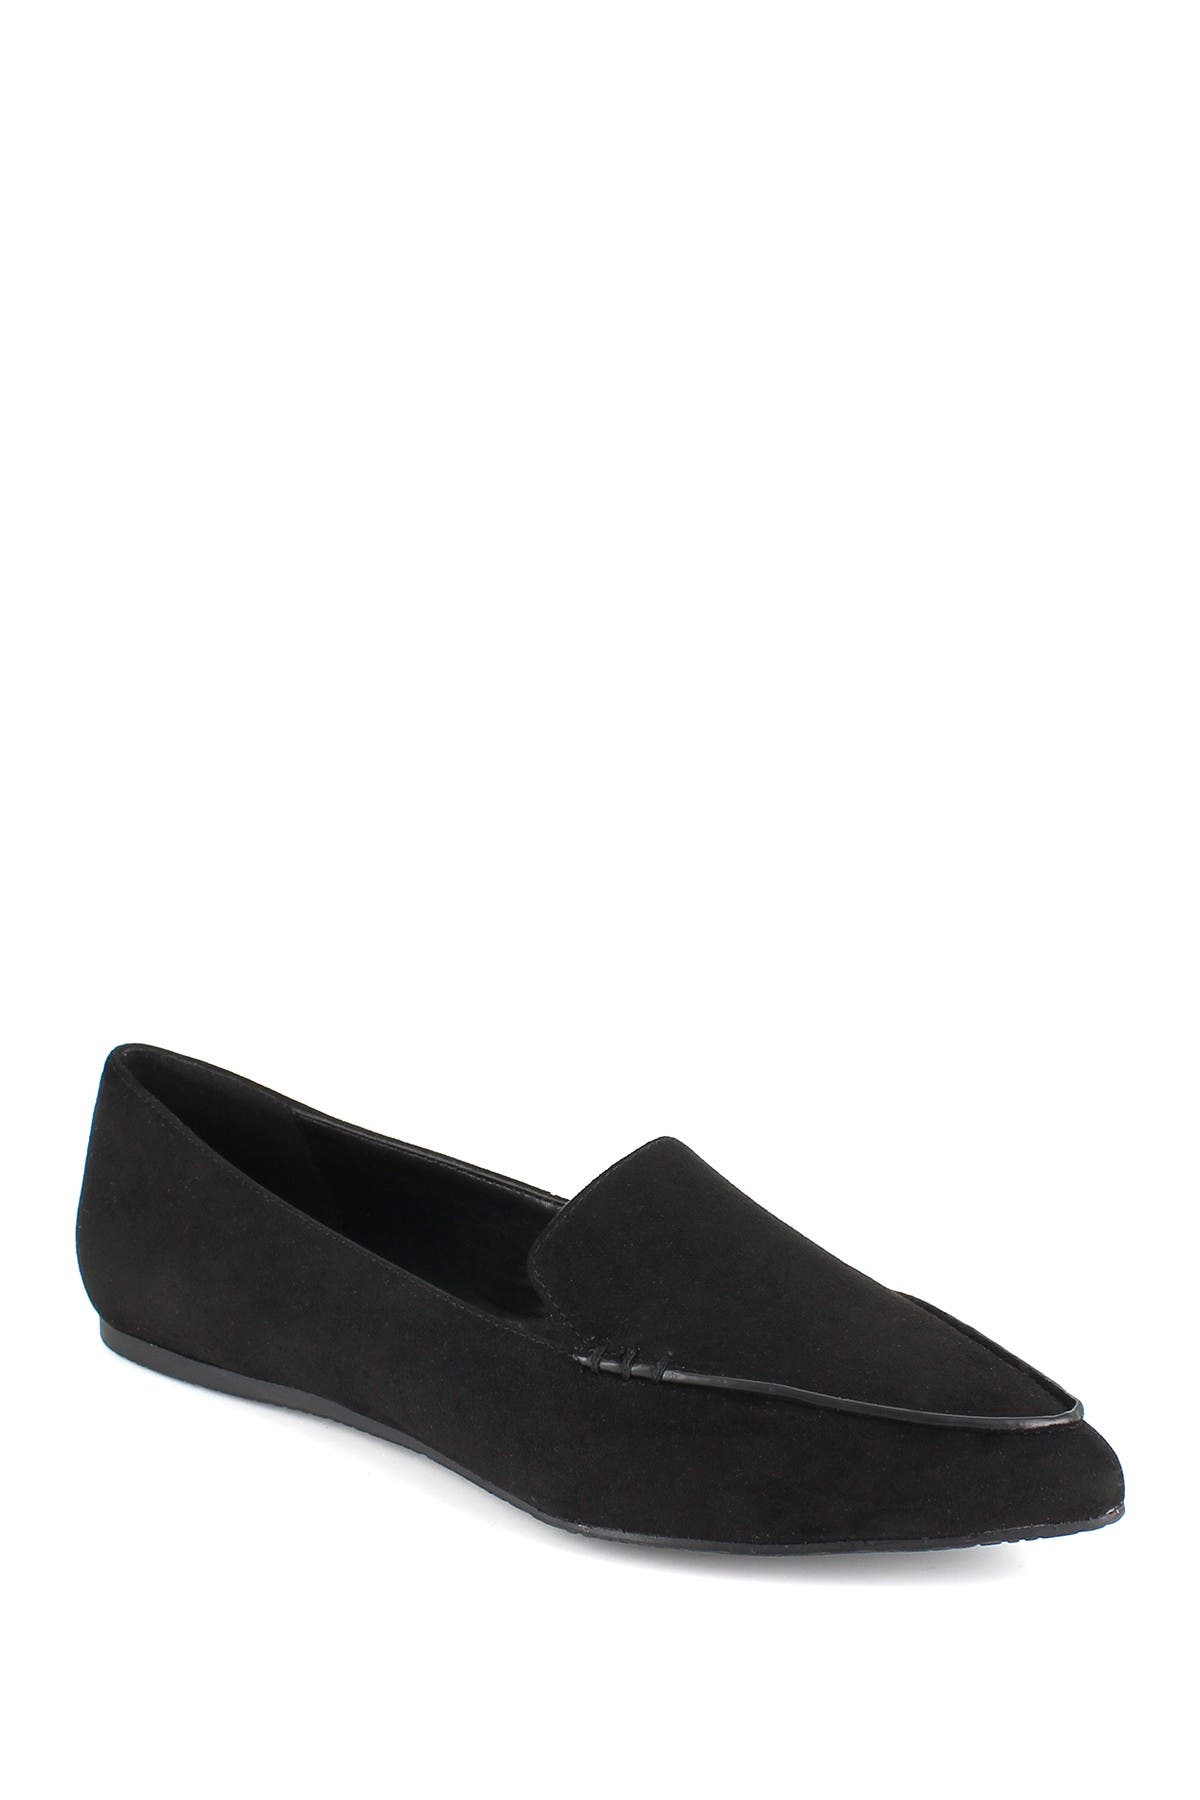 Esprit Blaire Pointed Toe Flat In Black